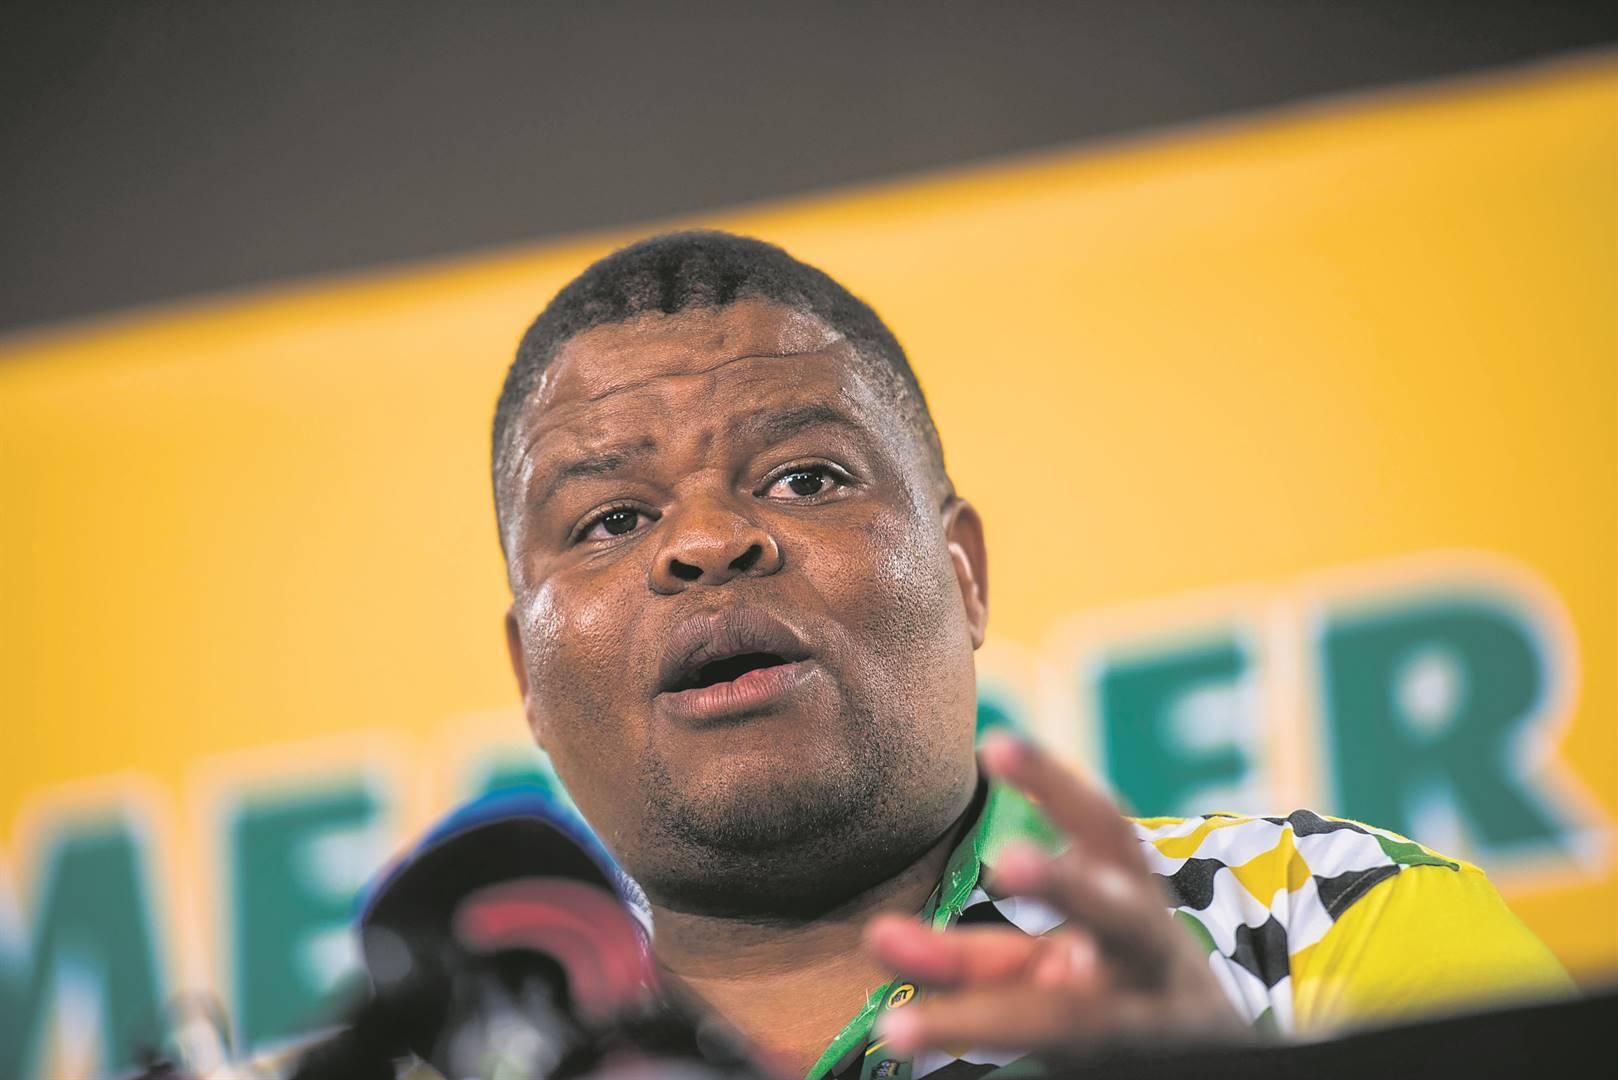 Mahlobo was 'key cog in state capture project', says Cope as it lays charges against him